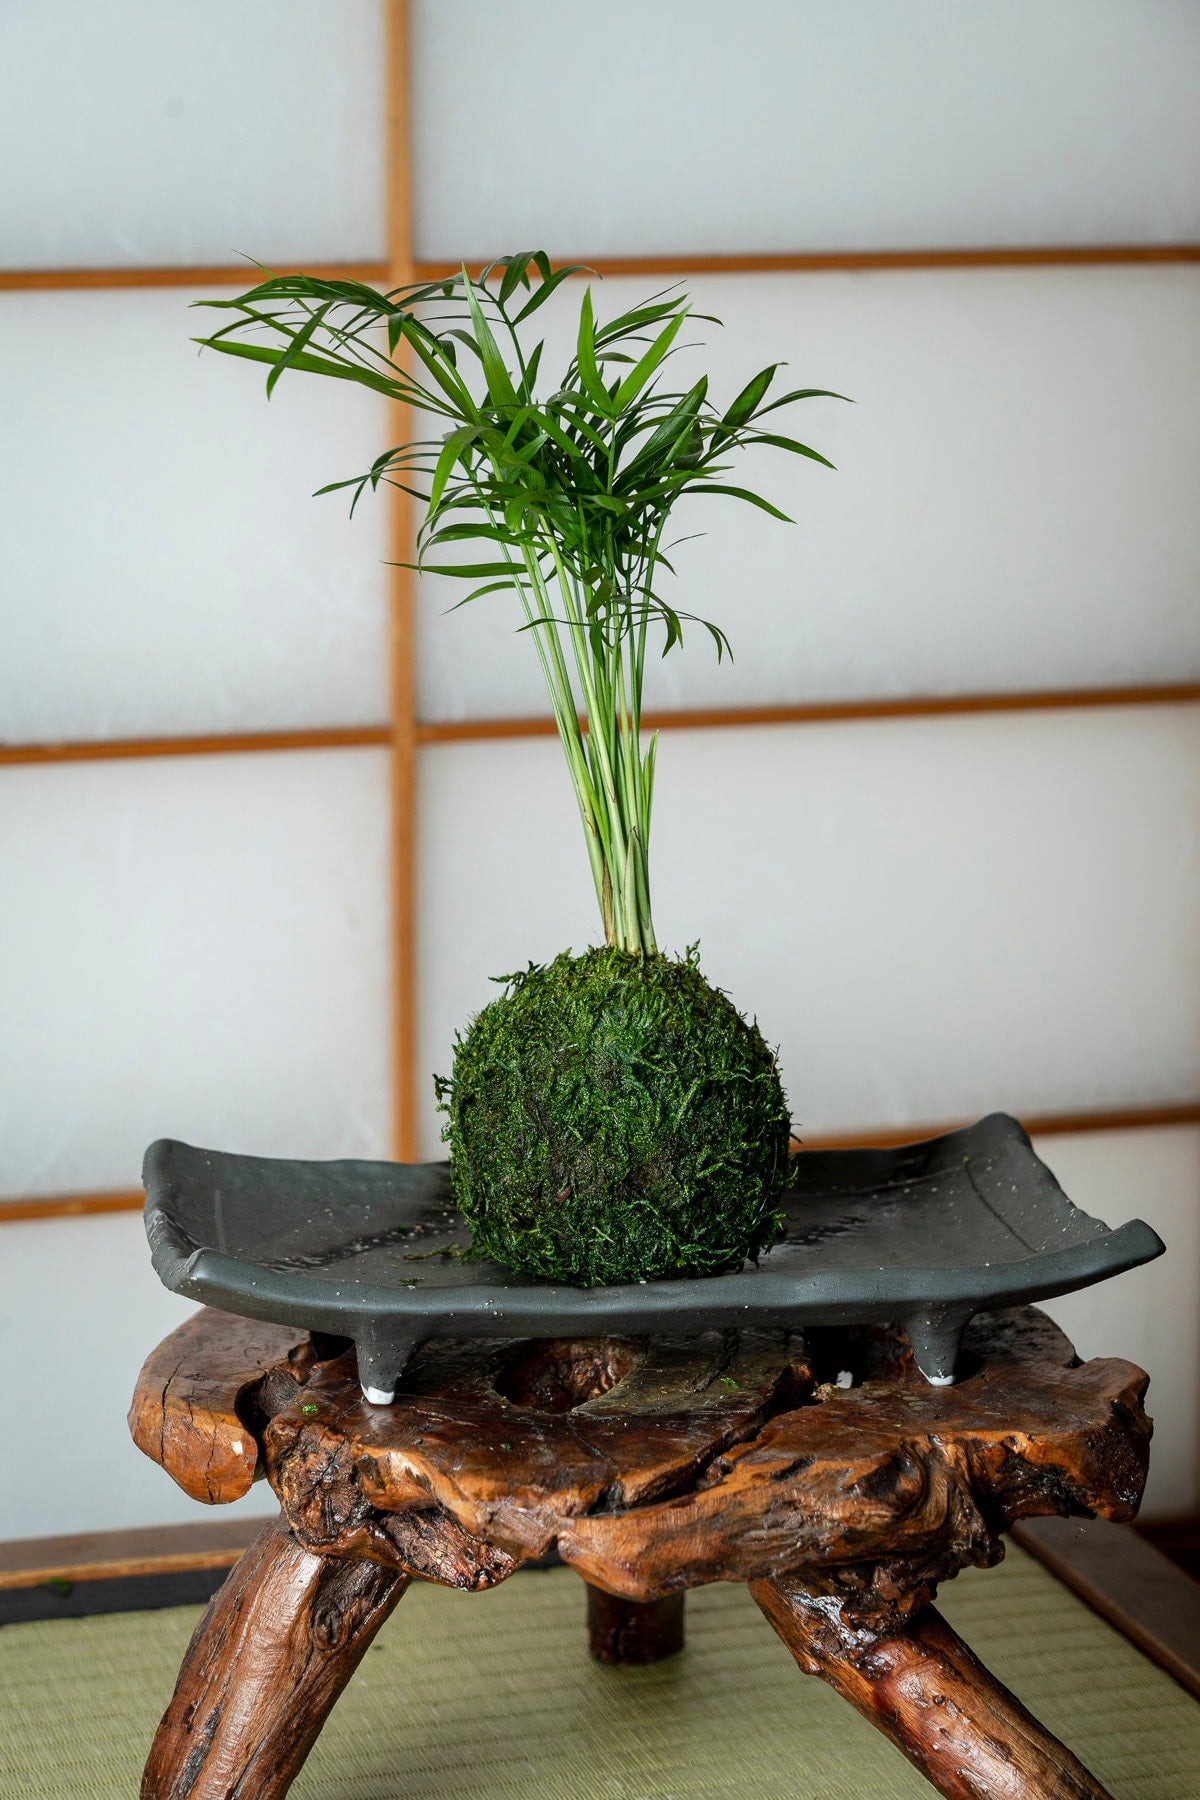 Good for Eco Cube Air! Mini Parlor Palm Kokedama - Moss ball, Japanese Living Art, a spin off of Bonsai, Japanese botanical technique.